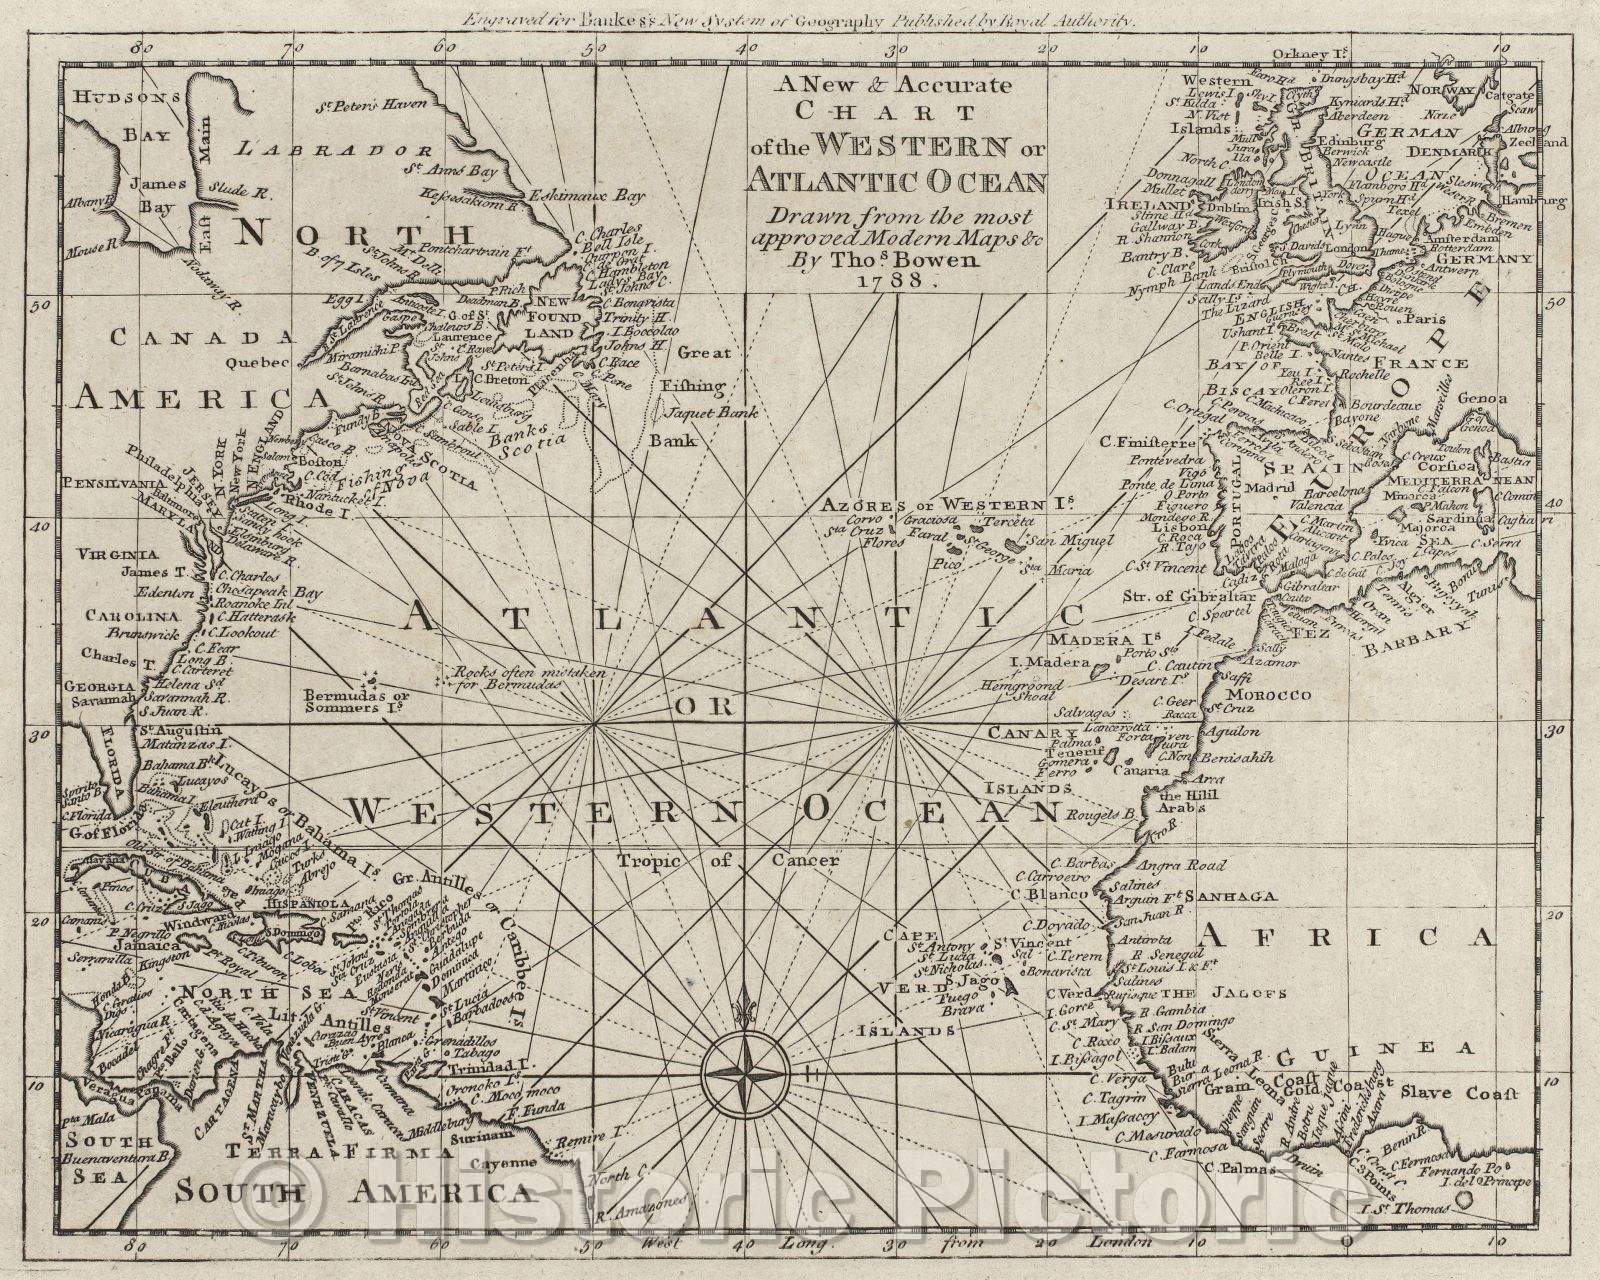 Historic Map : A New and Accurate Chart of the Western or Atlantic Ocean Drawn from the most approved Modern Maps andc by Thos. Bowen, 1788., 1788 , Vintage Wall Art